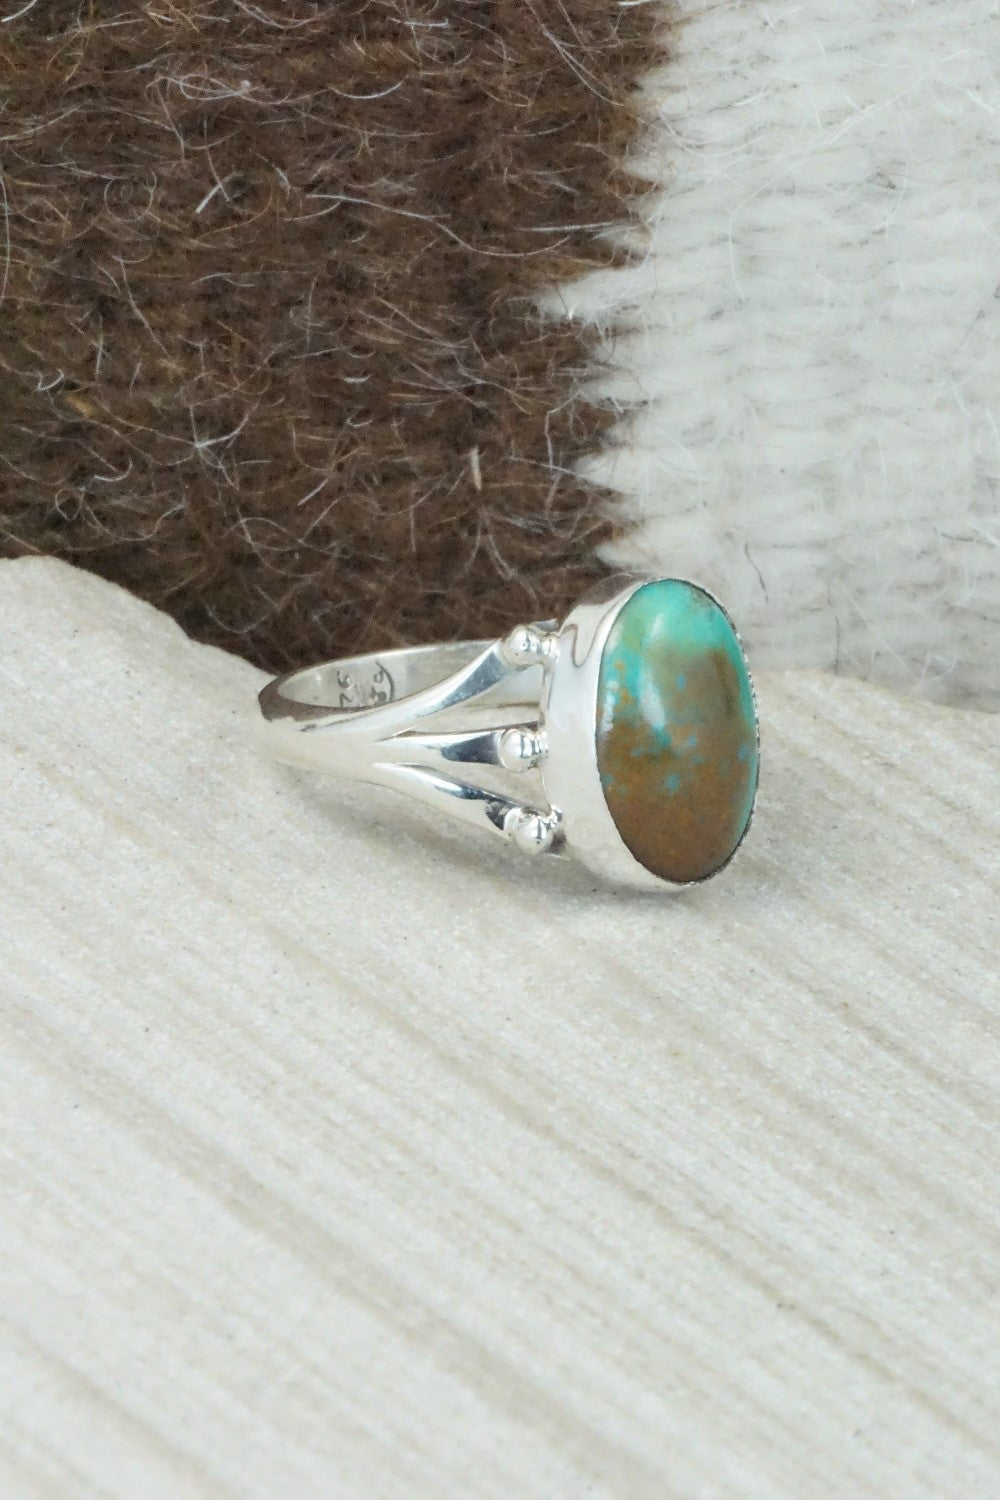 Turquoise & Sterling Silver Ring - Hiram Largo - Size 9.25